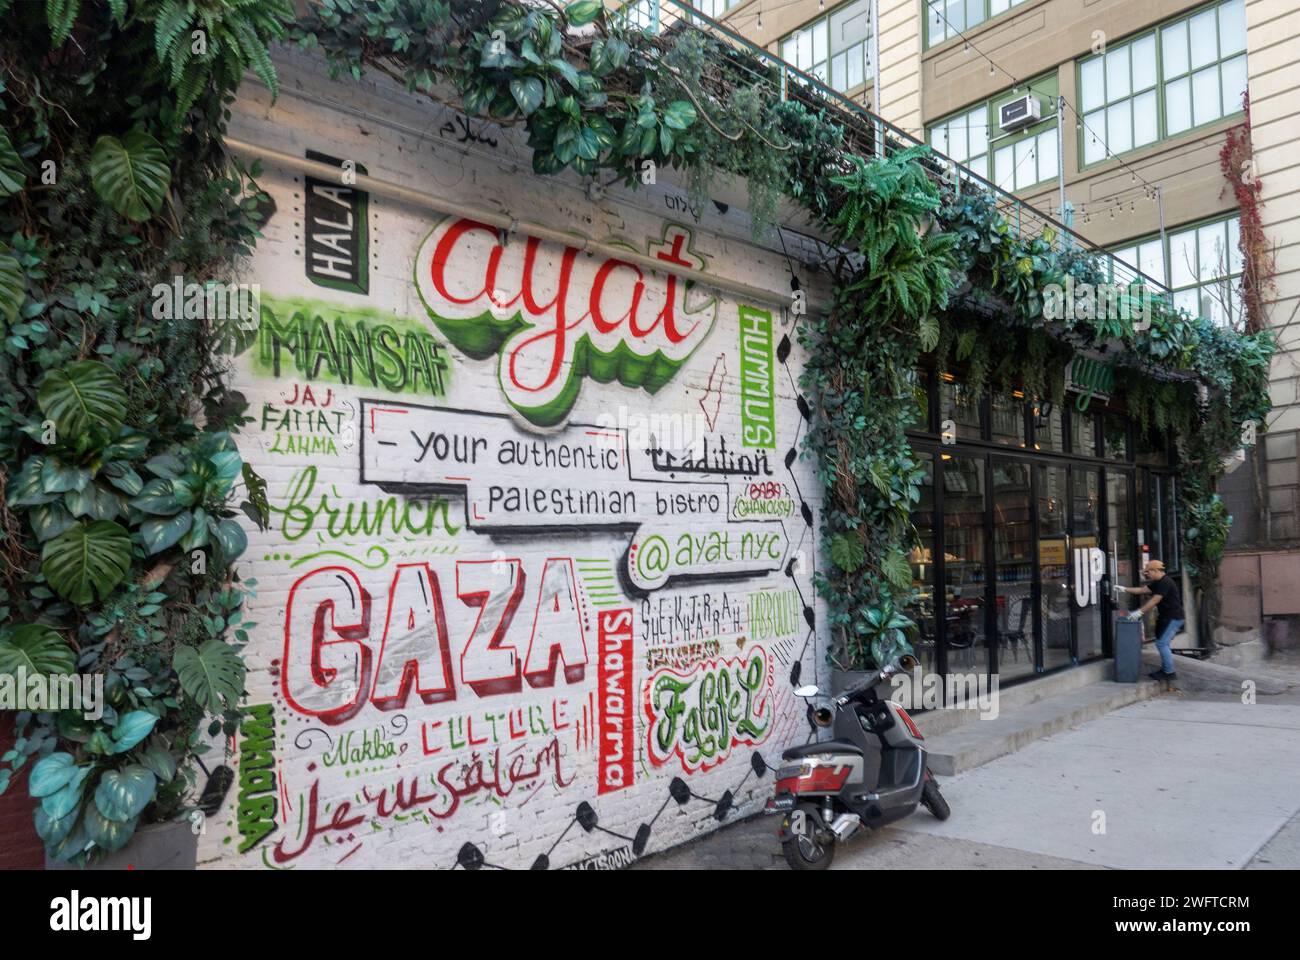 Ayat Palestinian restaurant in Industry City Sunset Park Brooklyn NYC Stock Photo